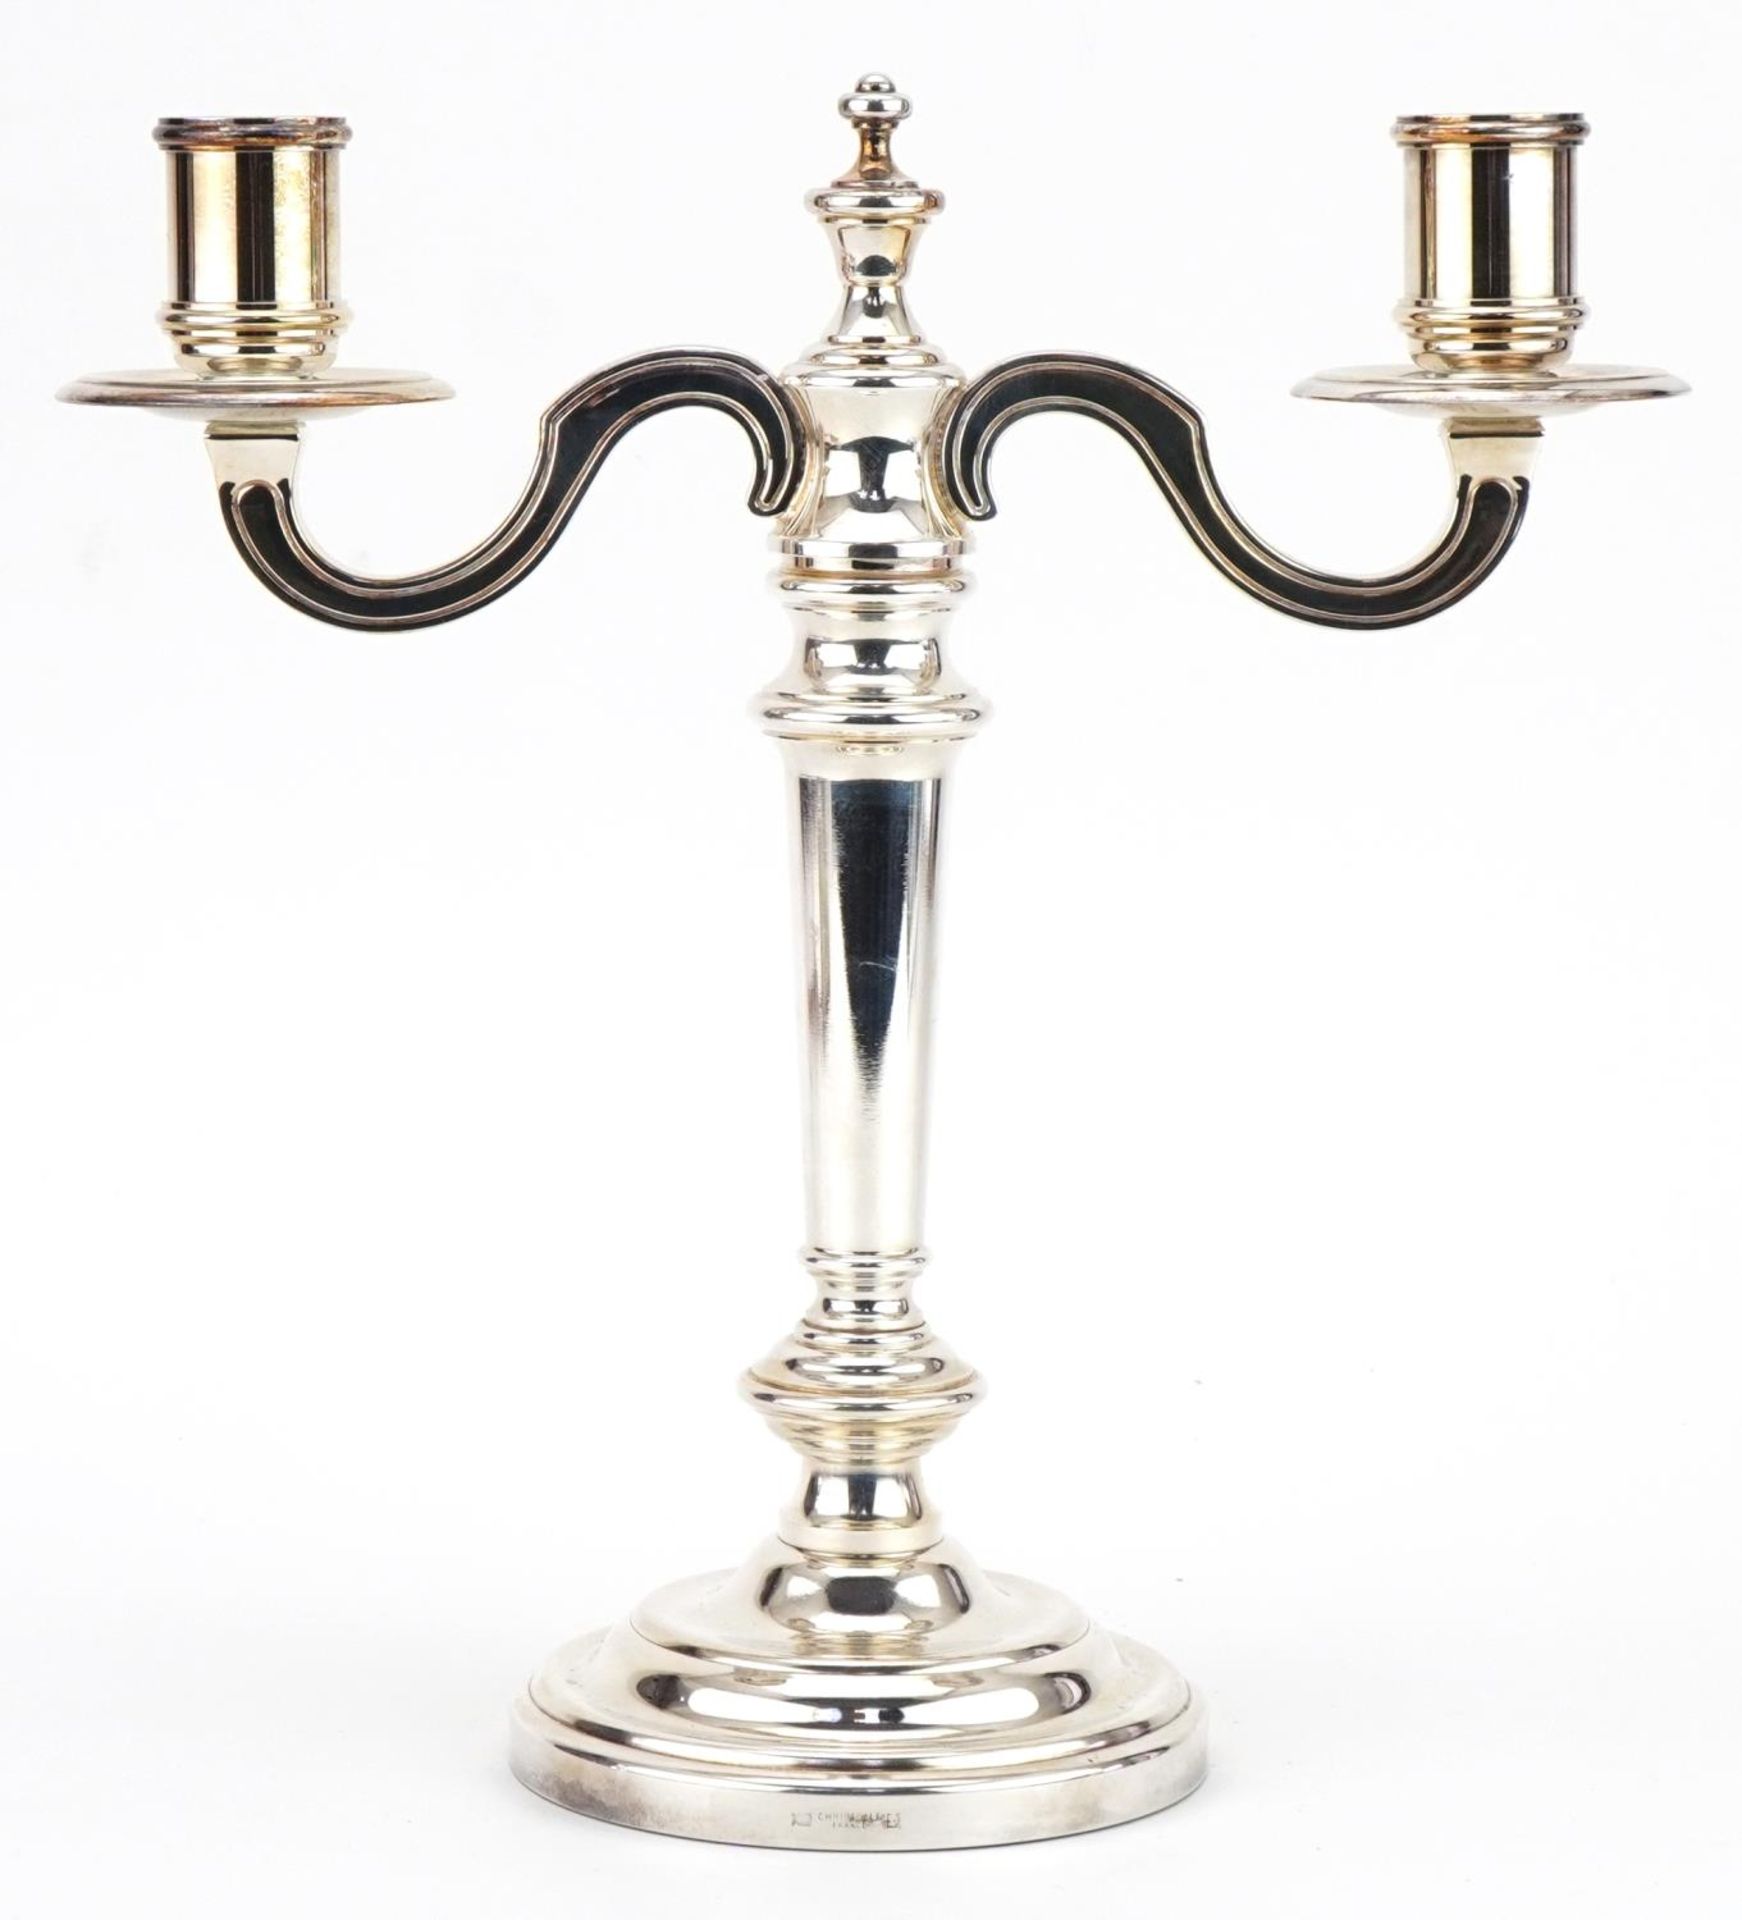 Christophle, French silver plated two branch candelabra, 25cm high : For further information on this - Image 2 of 4